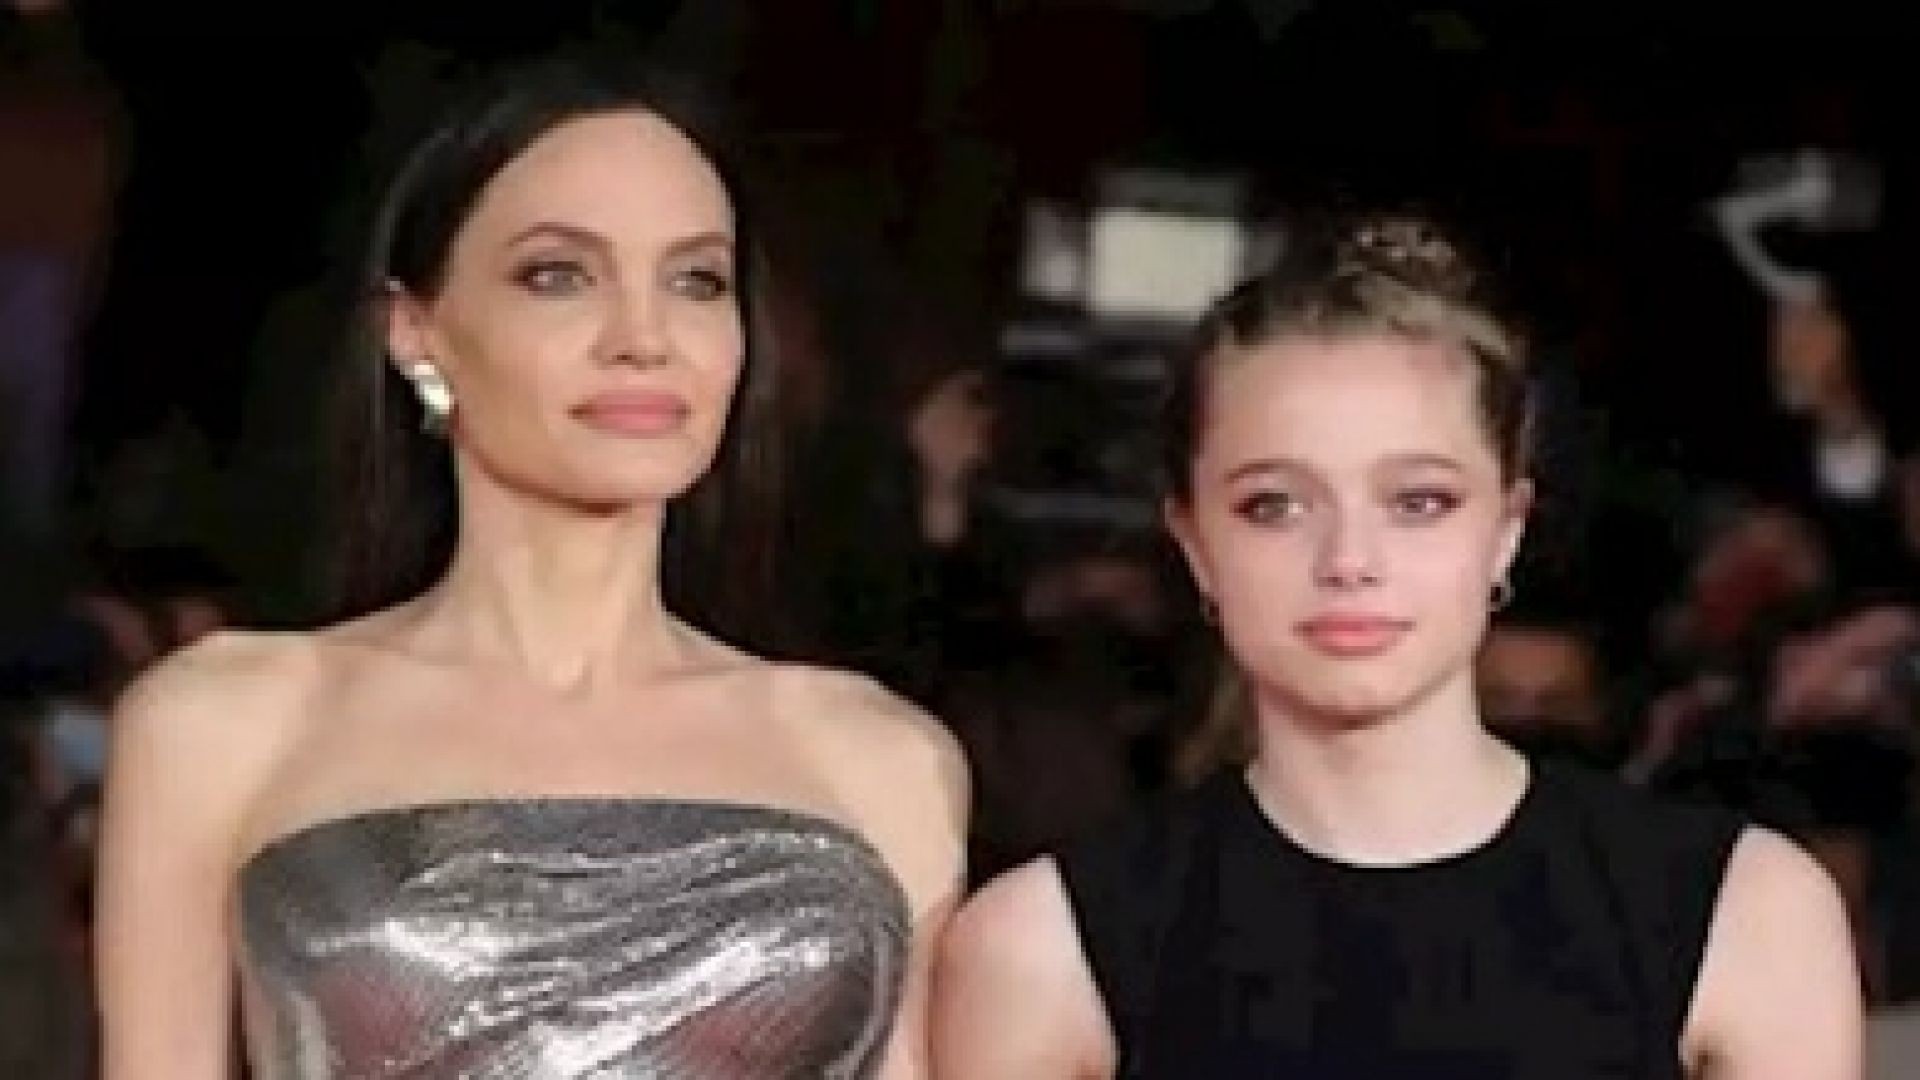 Shiloh Jolie-Pitt Just Did This For The First Time On The Red Carpet